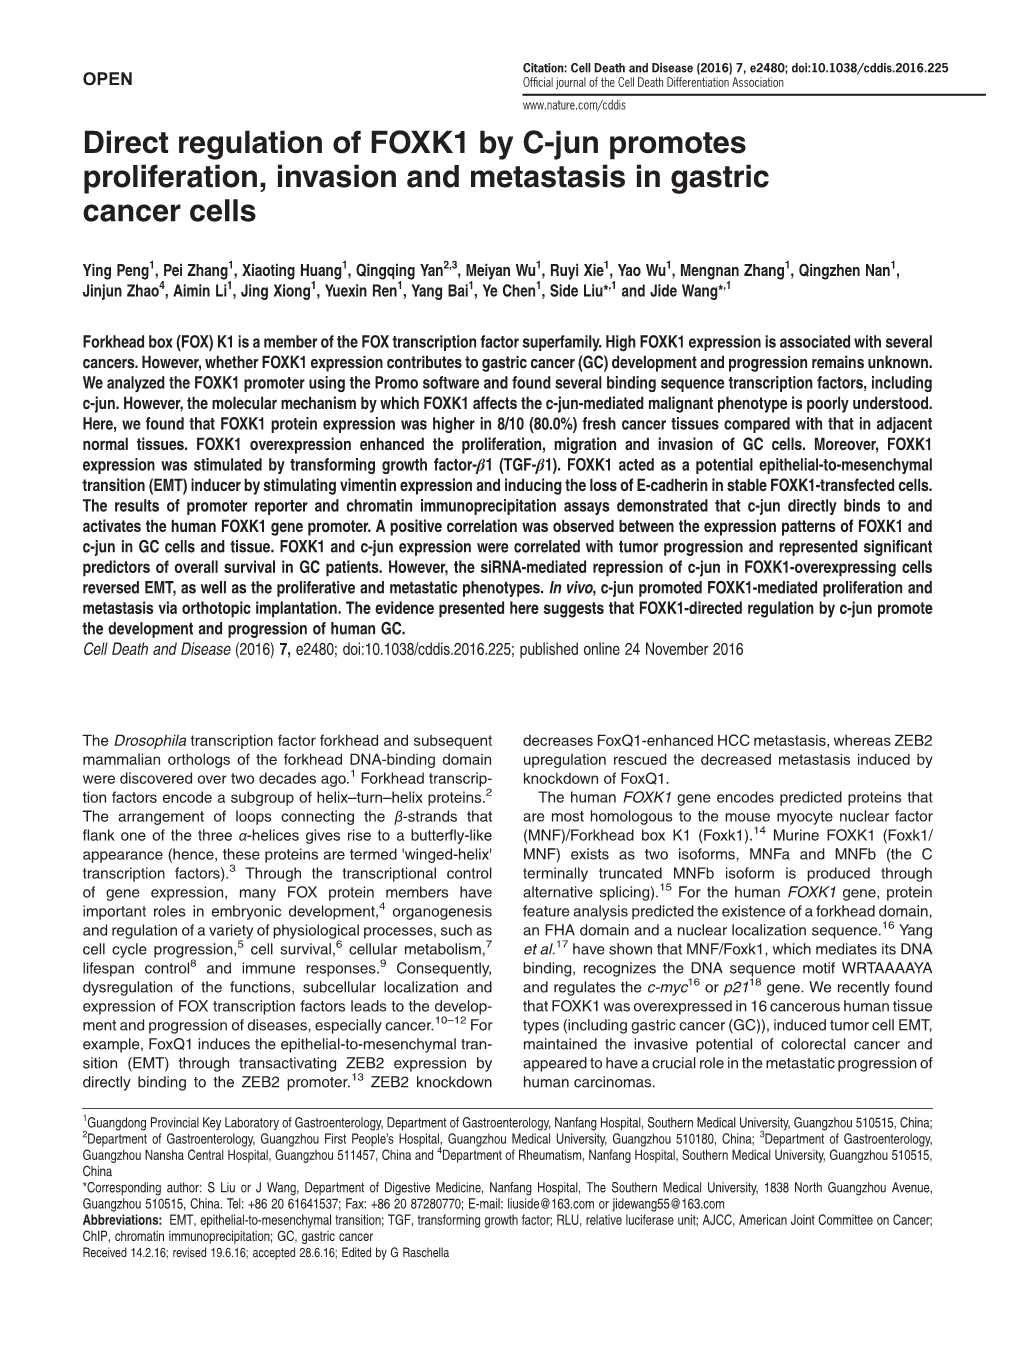 Direct Regulation of FOXK1 by C-Jun Promotes Proliferation, Invasion and Metastasis in Gastric Cancer Cells